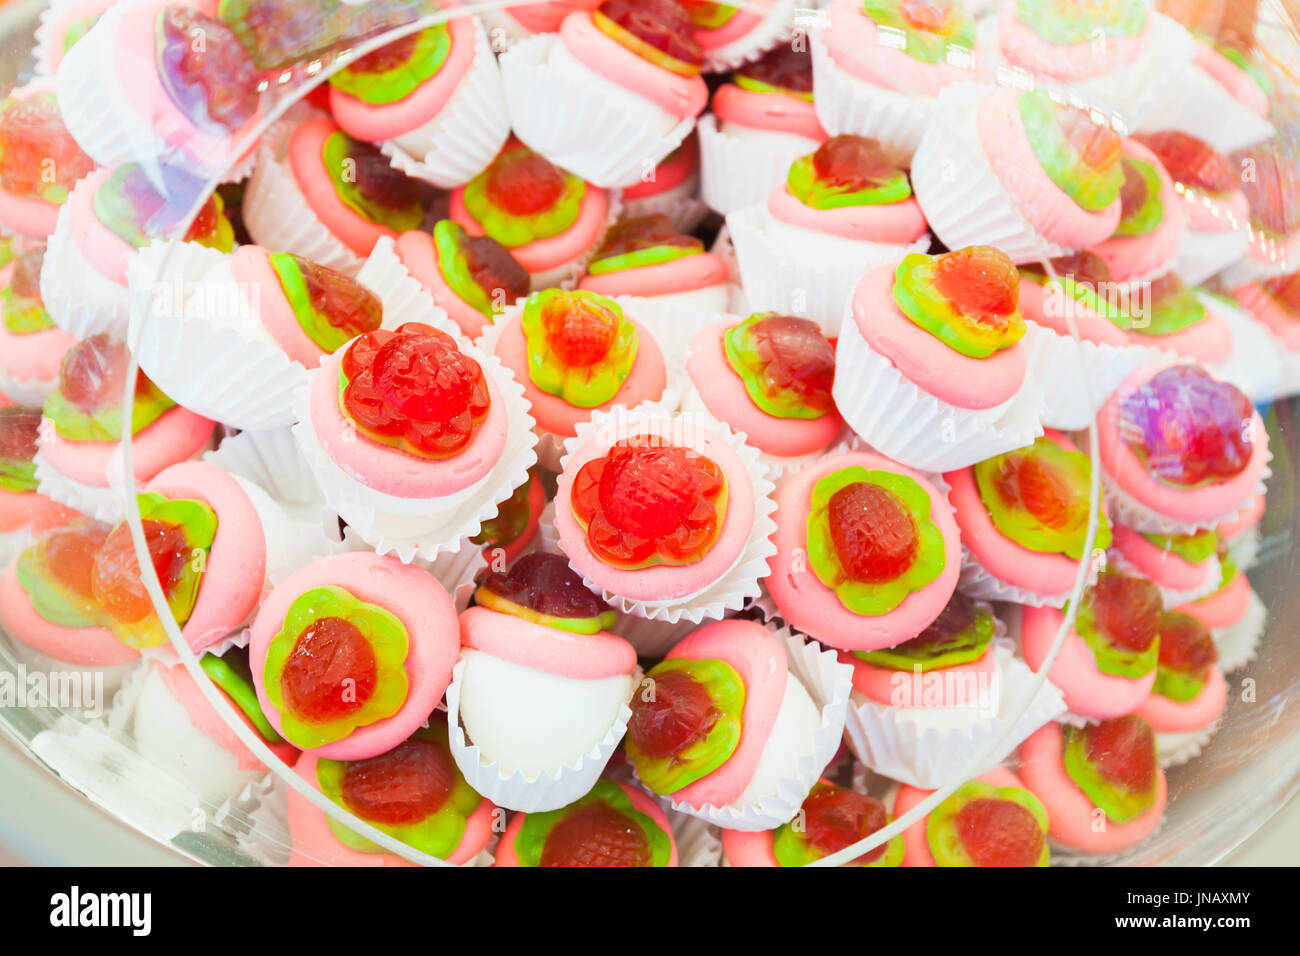 Pile of colorful homemade cakes in paper baskets with jelly flowers Stock Photo